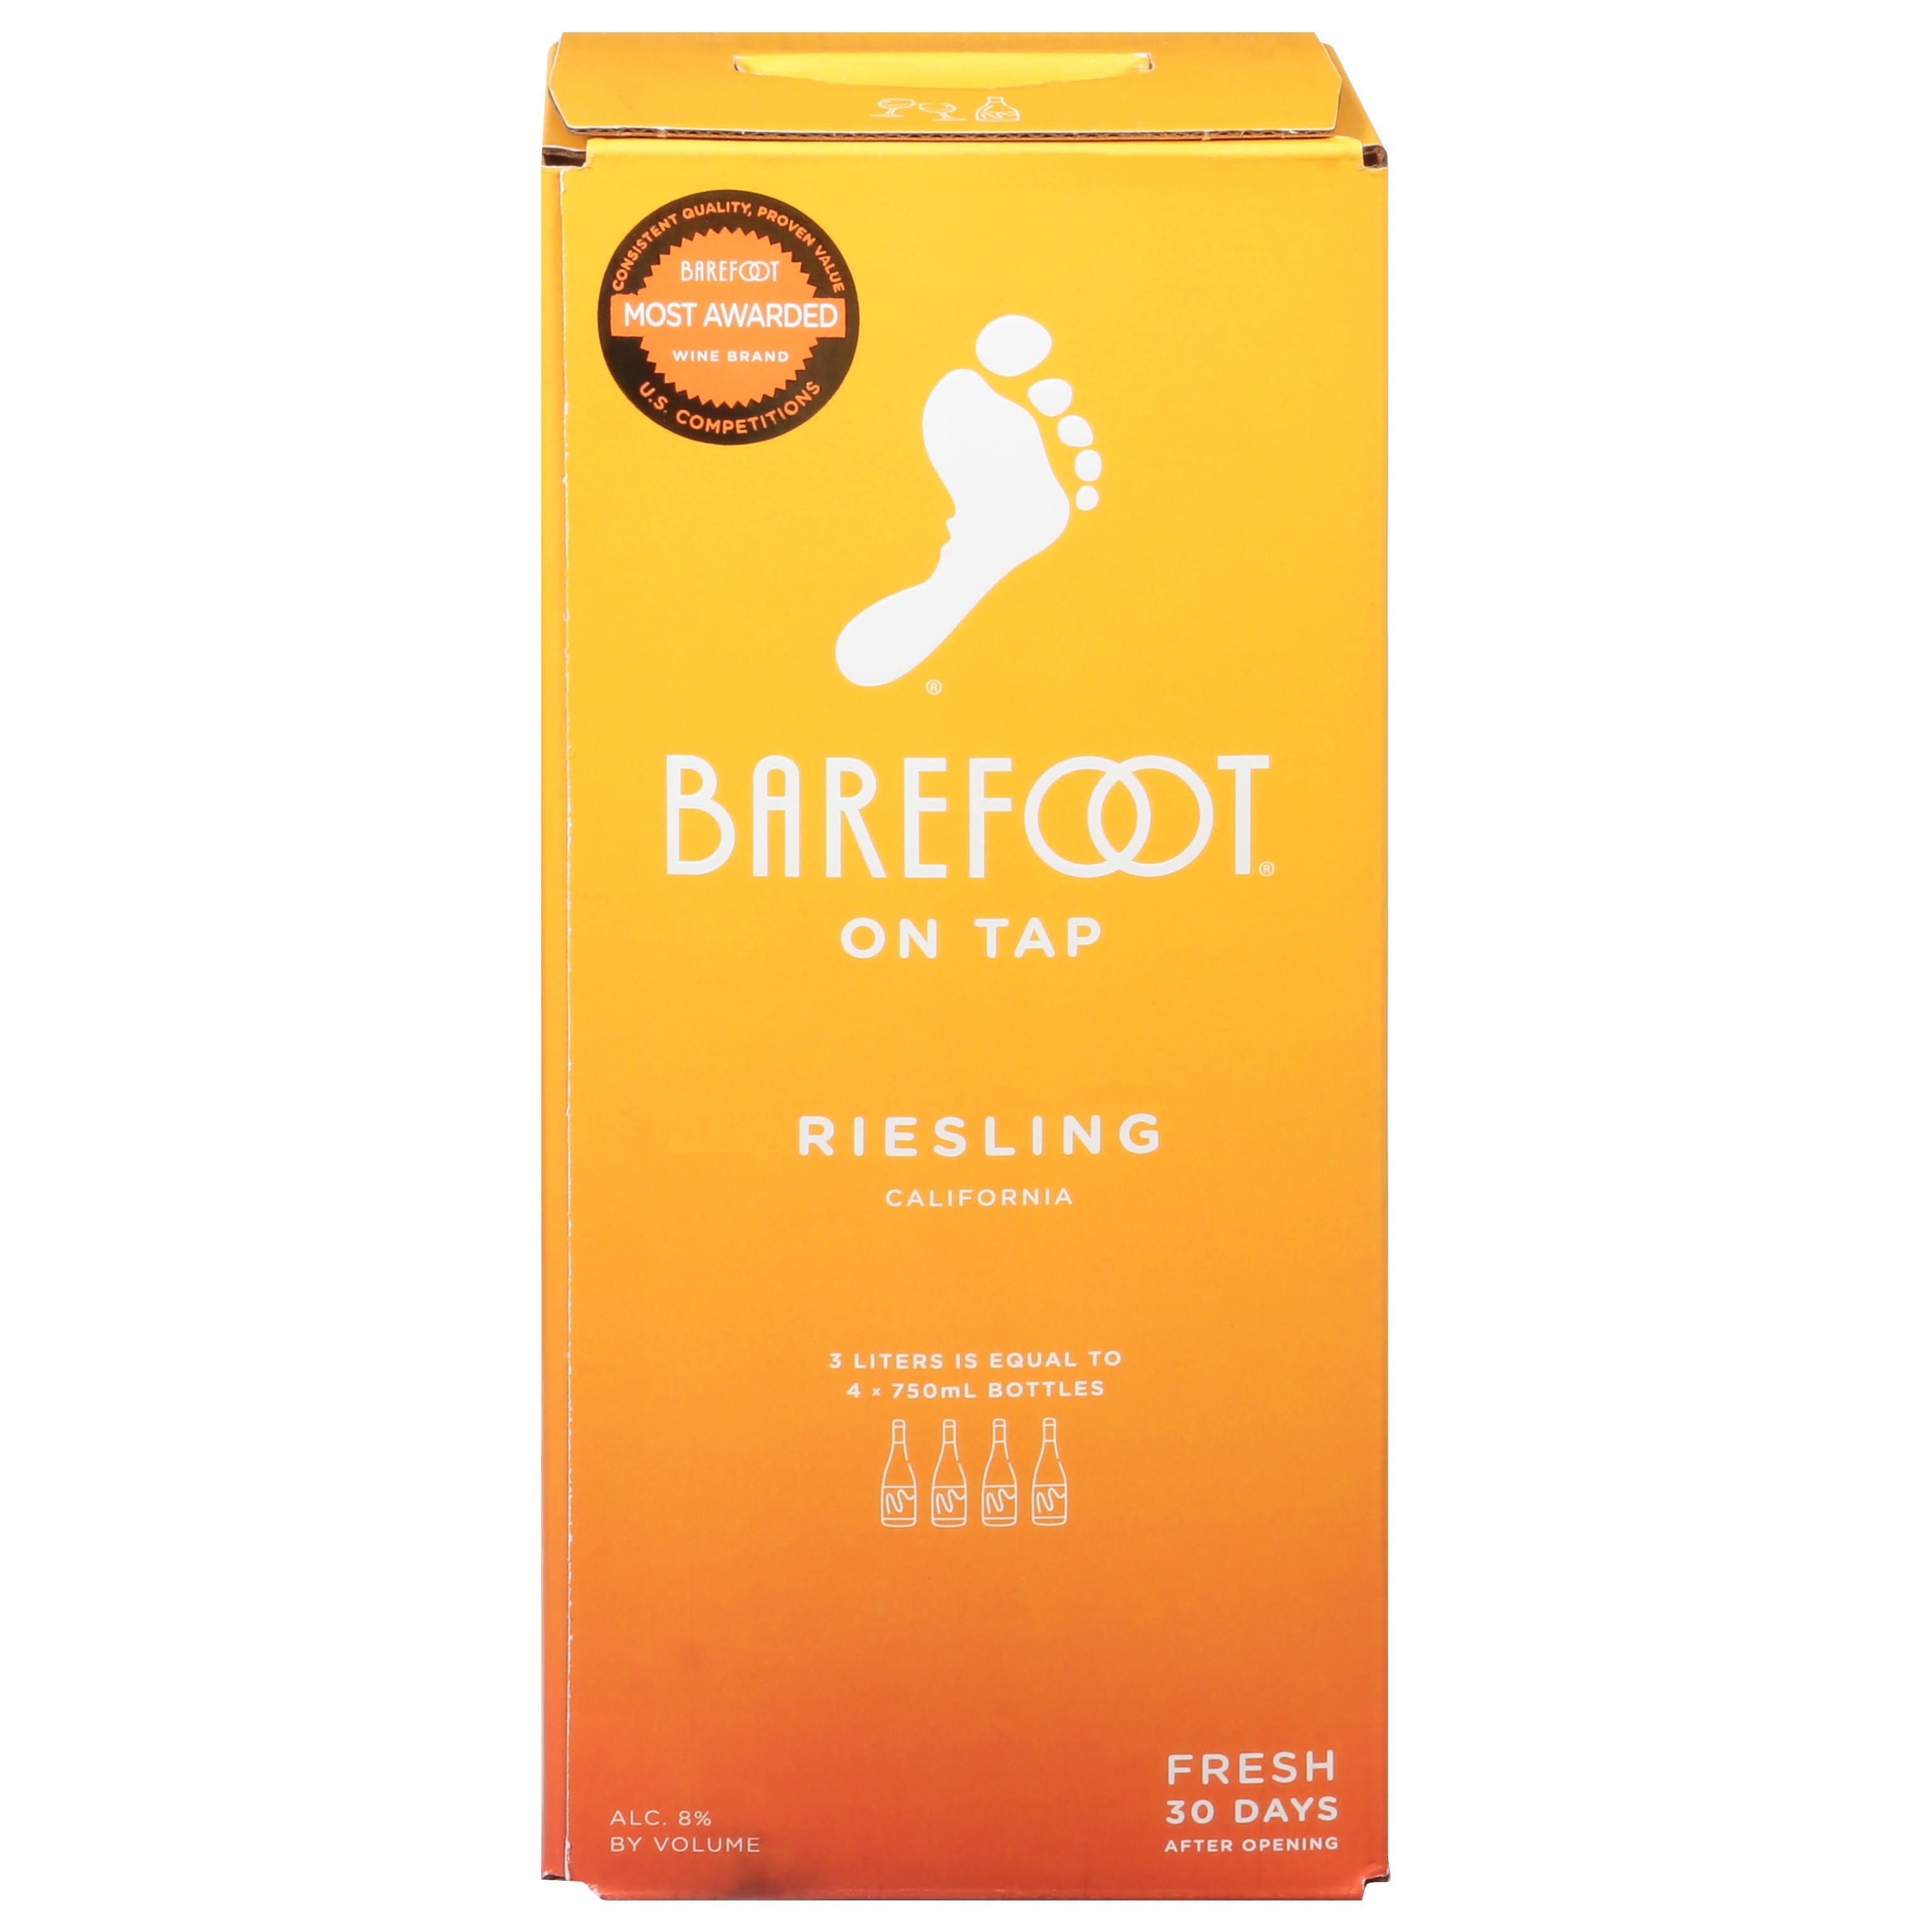 Barefoot Riesling: A Refreshing Sweet White Wine | Image